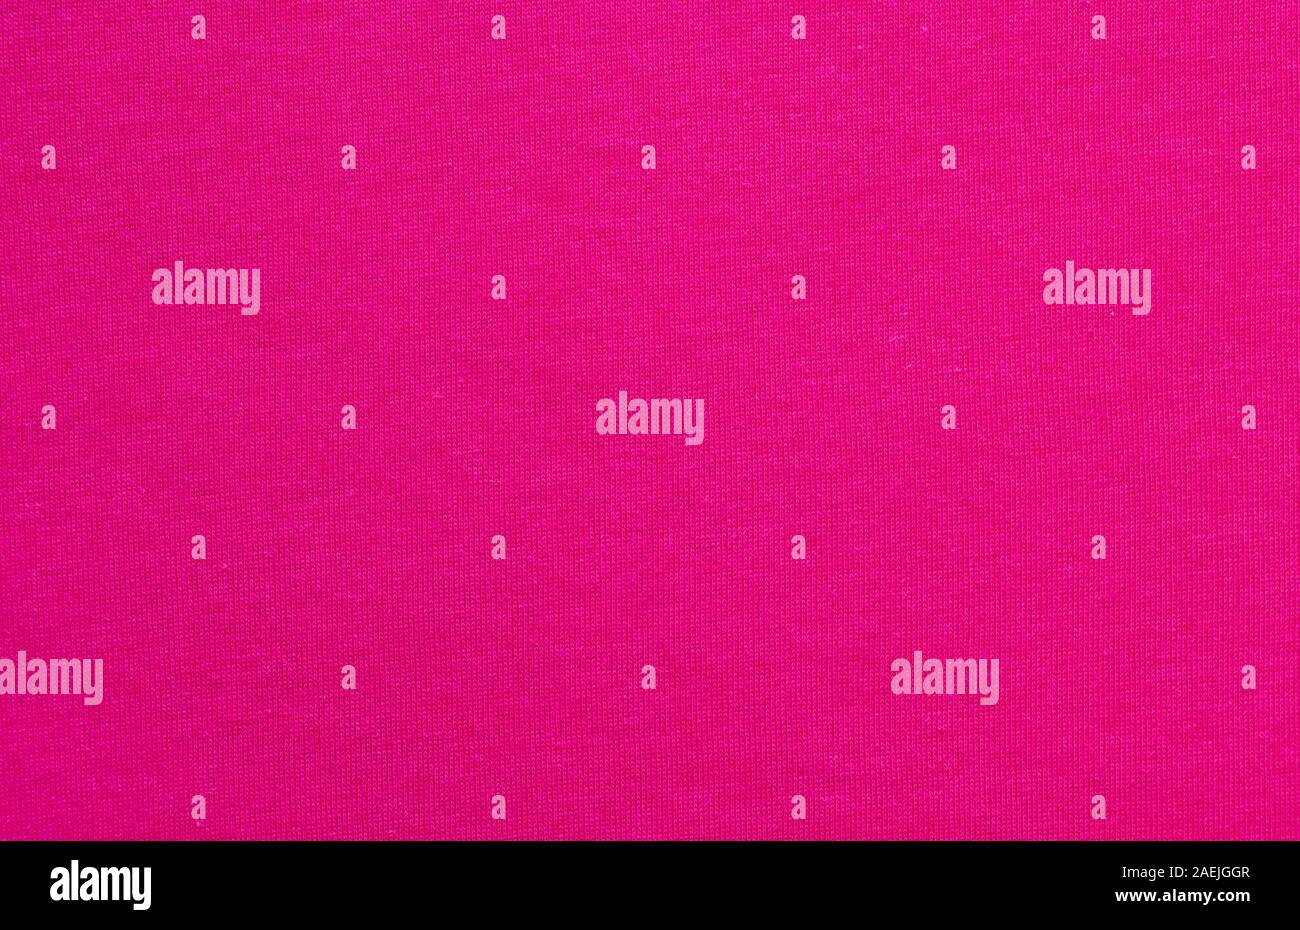 Bright pink t-shirt cotton knitted fabric texture swatch Stock Photo